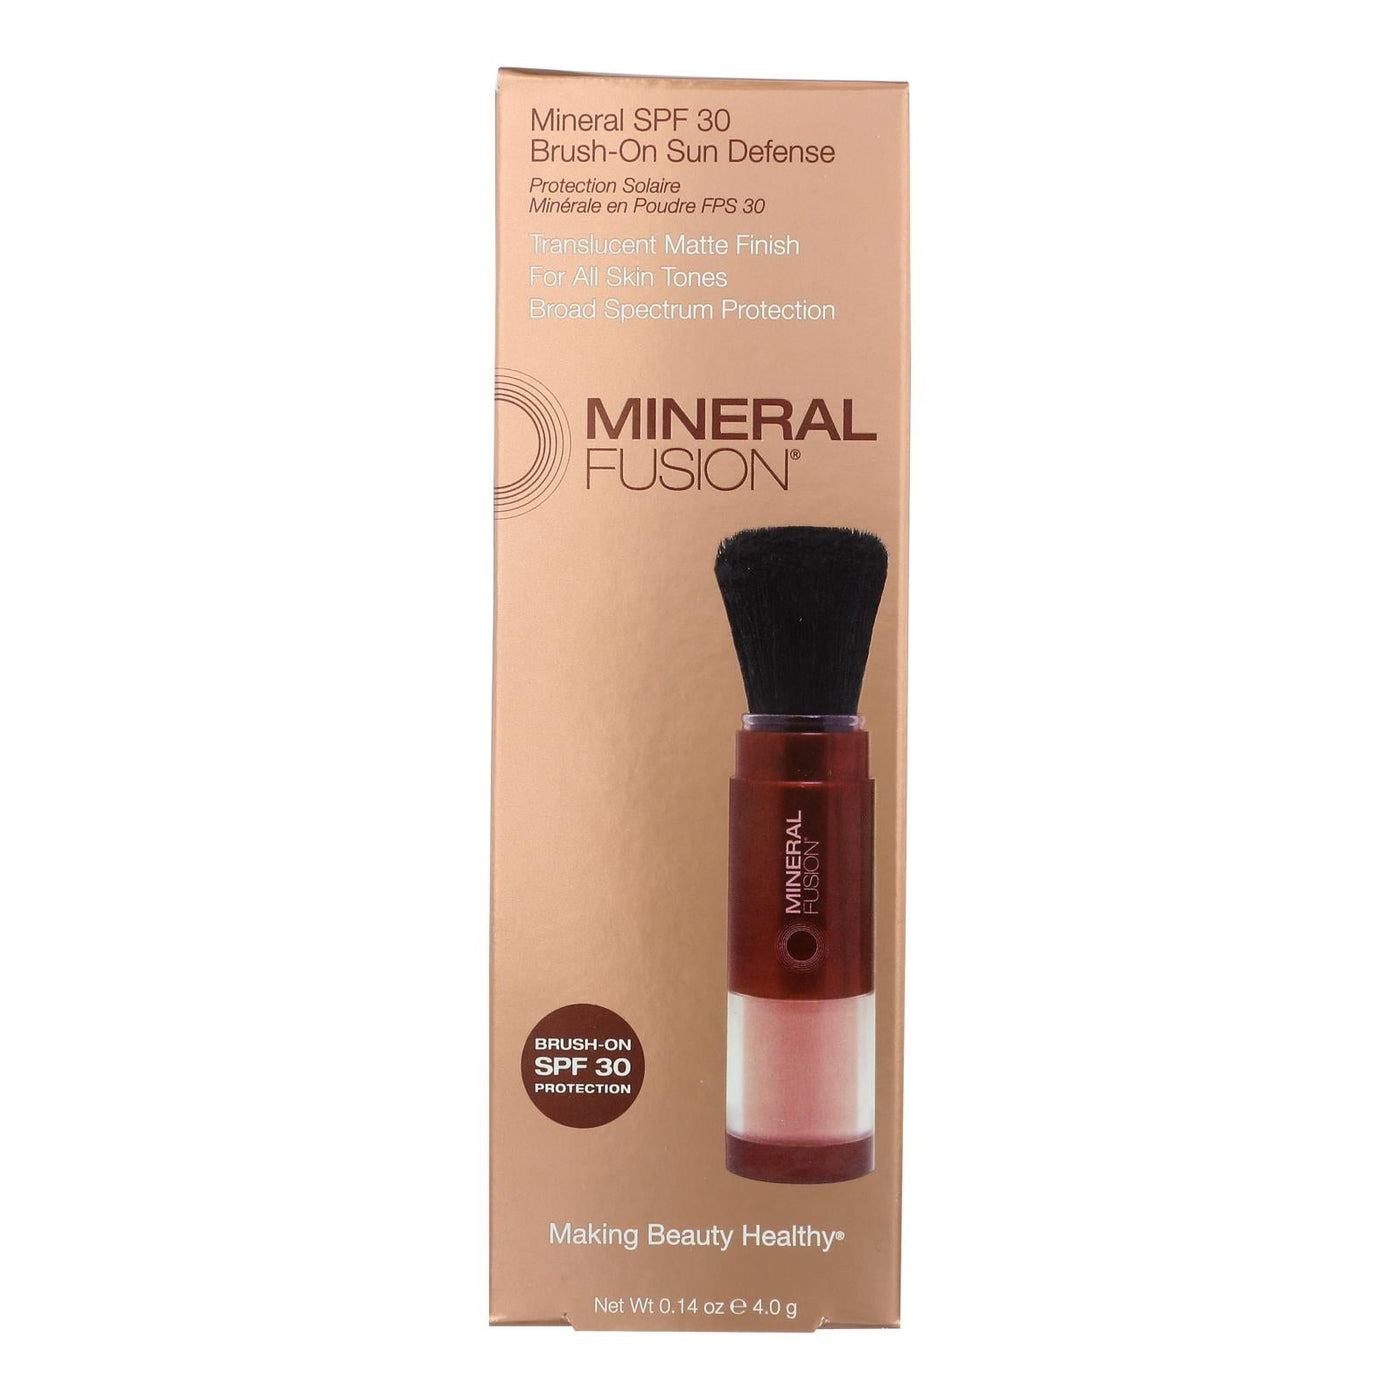 Mineral Fusion - Mineral Brush-on Sun Defense - Spf 30 - 0.14 Oz. - OnlyNaturals